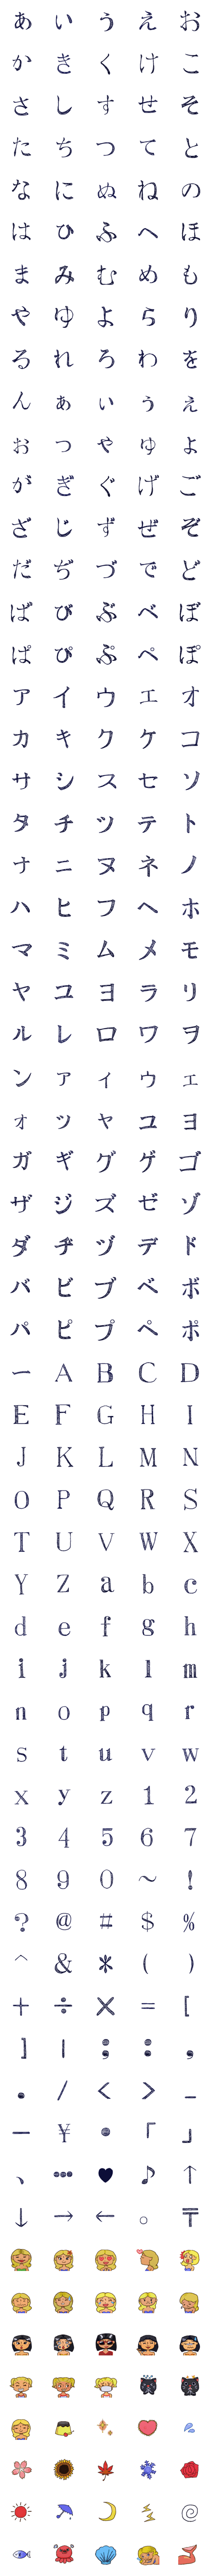 [LINE絵文字]人魚姫セリーヌ (絵文字)の画像一覧